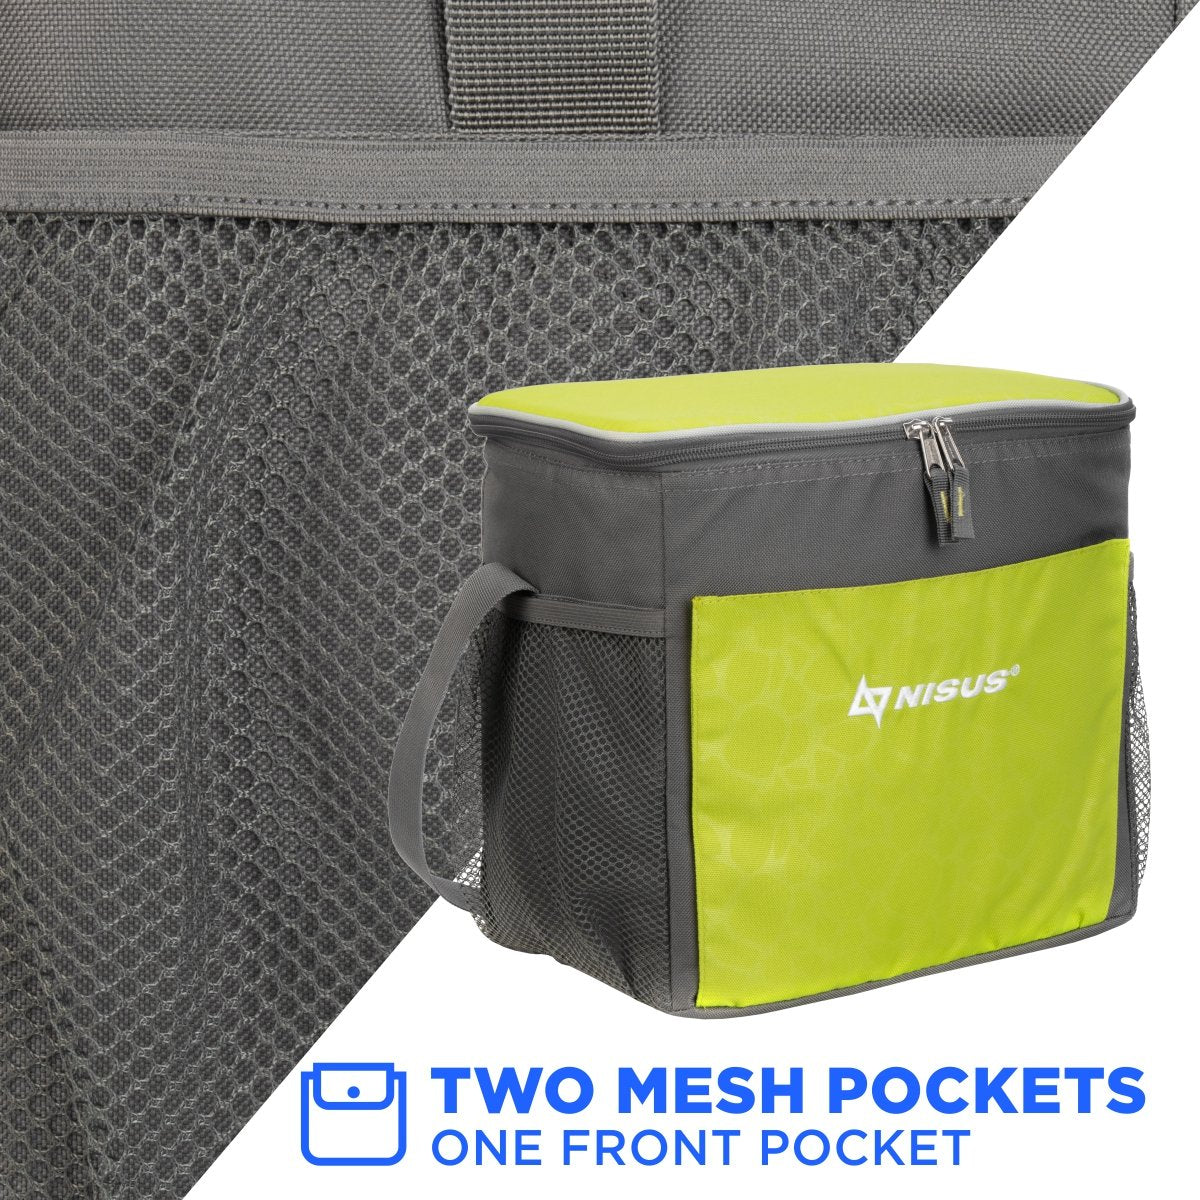 Beach Soft Sided Cooler Bag featuring two mesh pockets